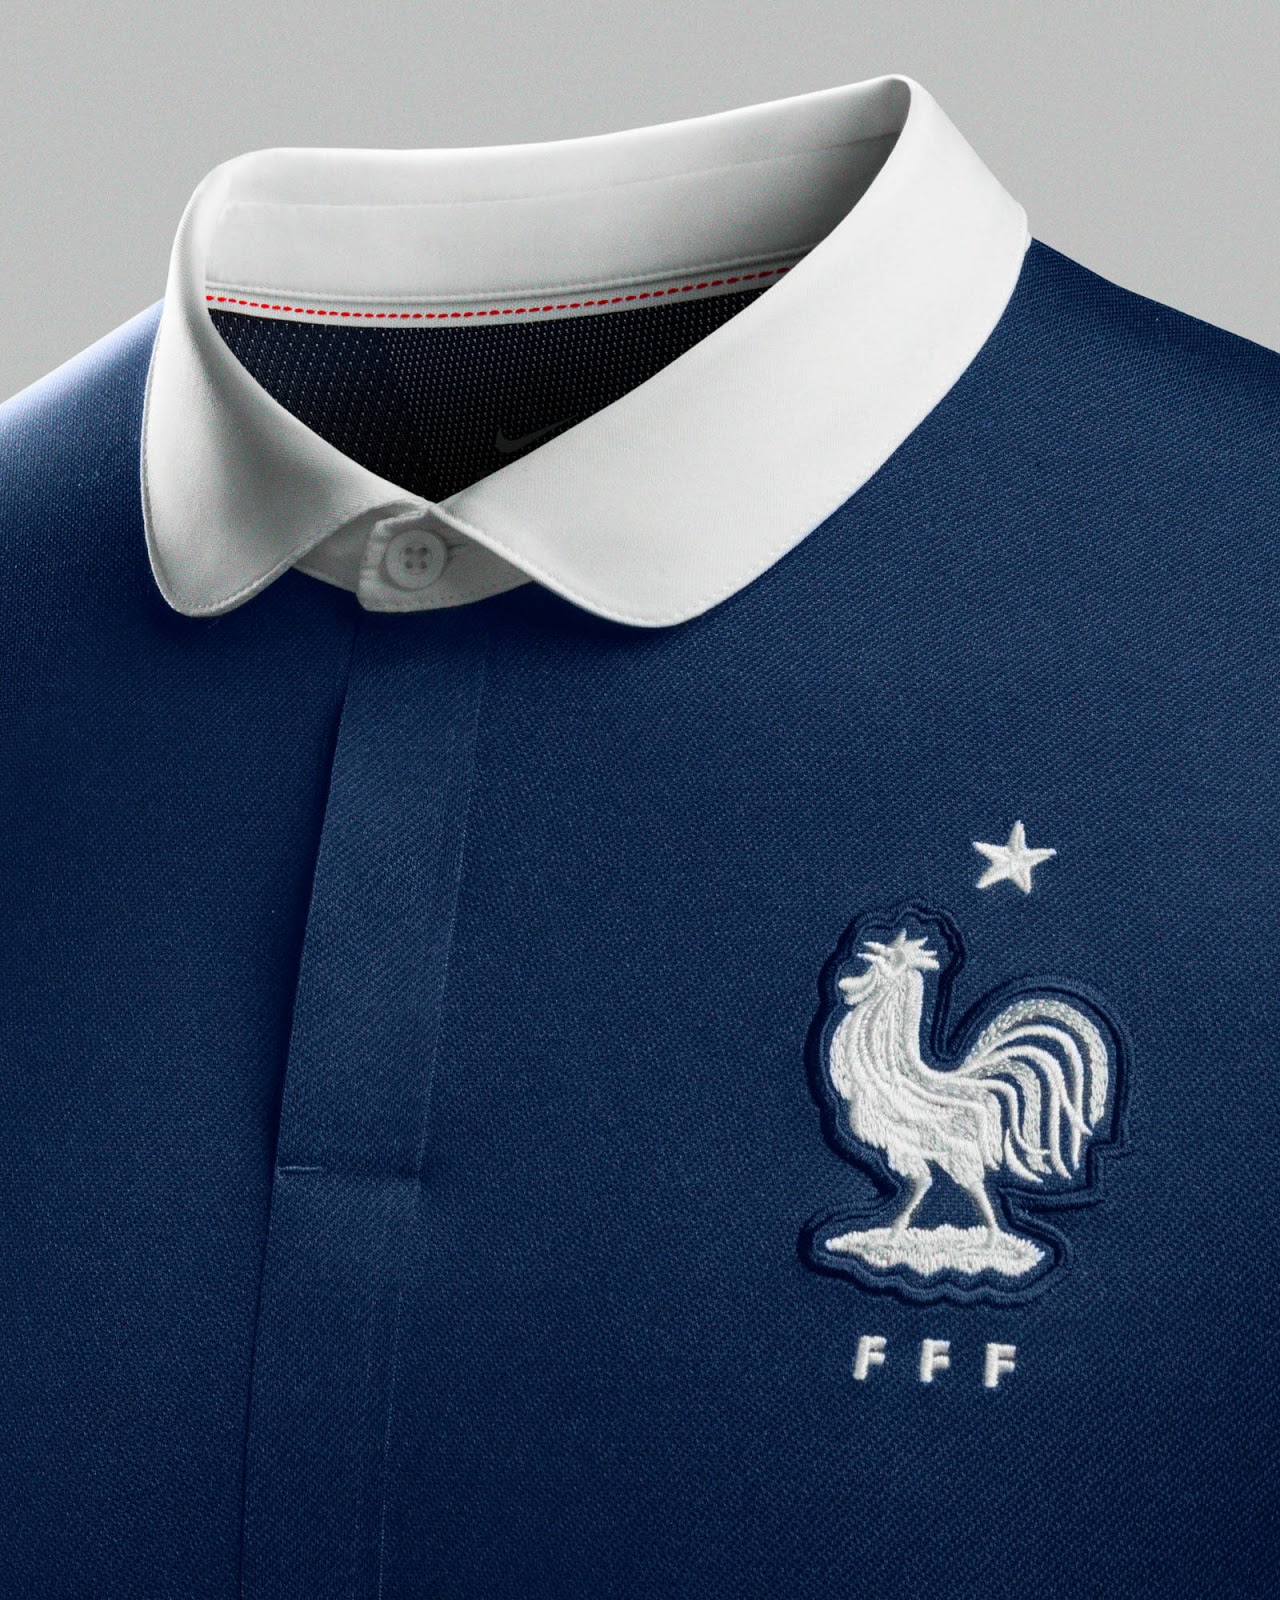 Fire Patch's Blog: FRANCE 2014 WORLD CUP HOME KIT UNVEILED!